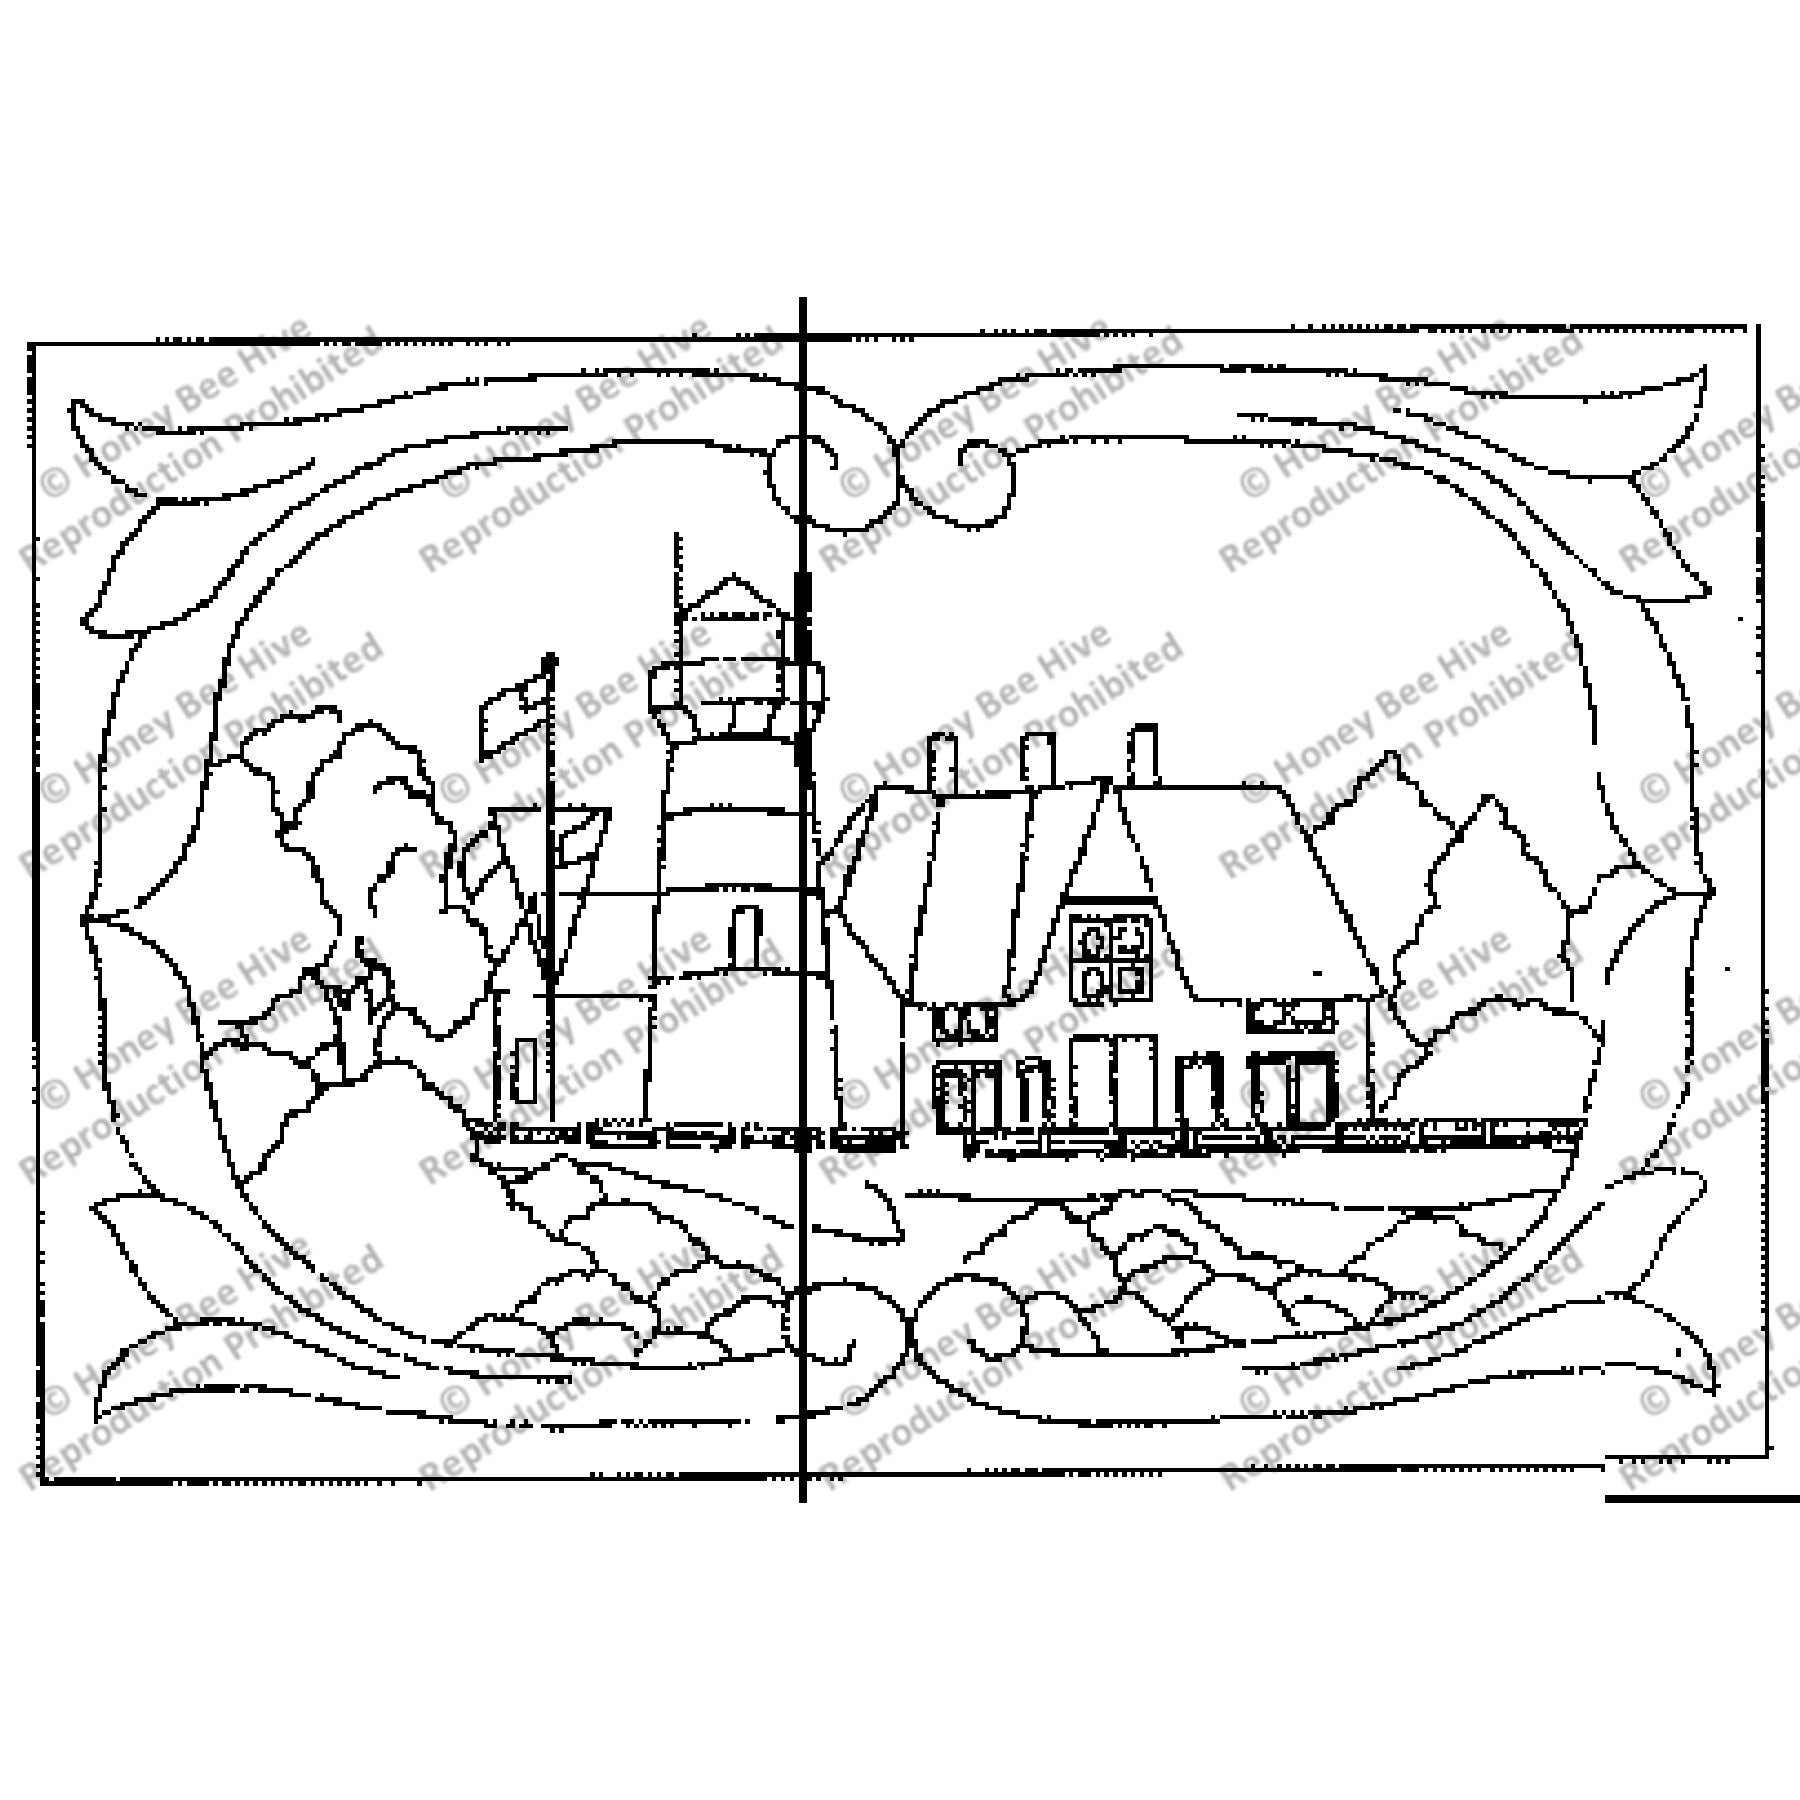 Chatham Light House, rug hooking pattern